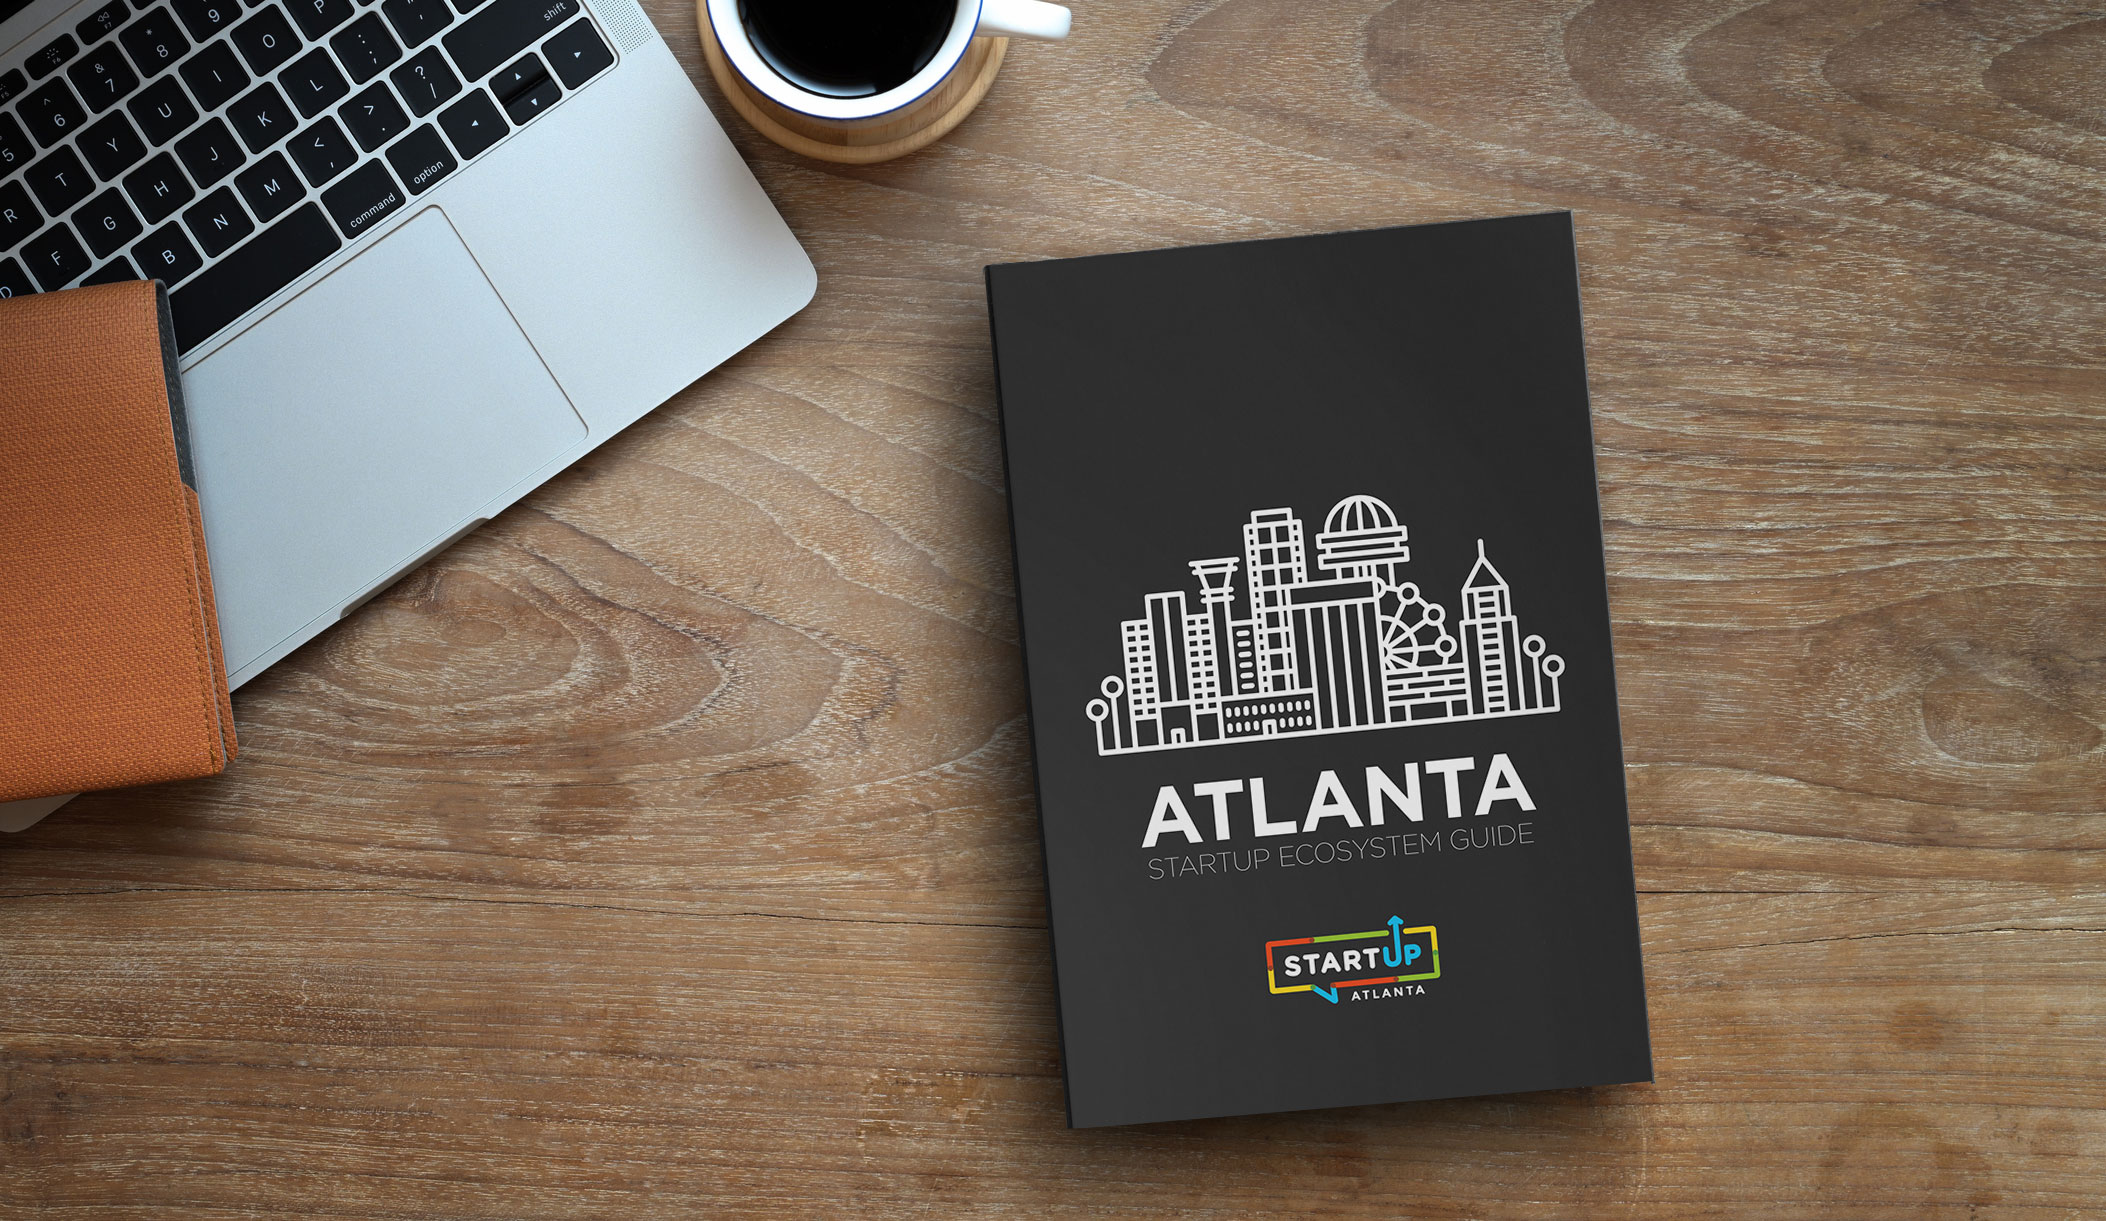 Startup Atlanta Releases the 2020 Guide to the Ecosystem